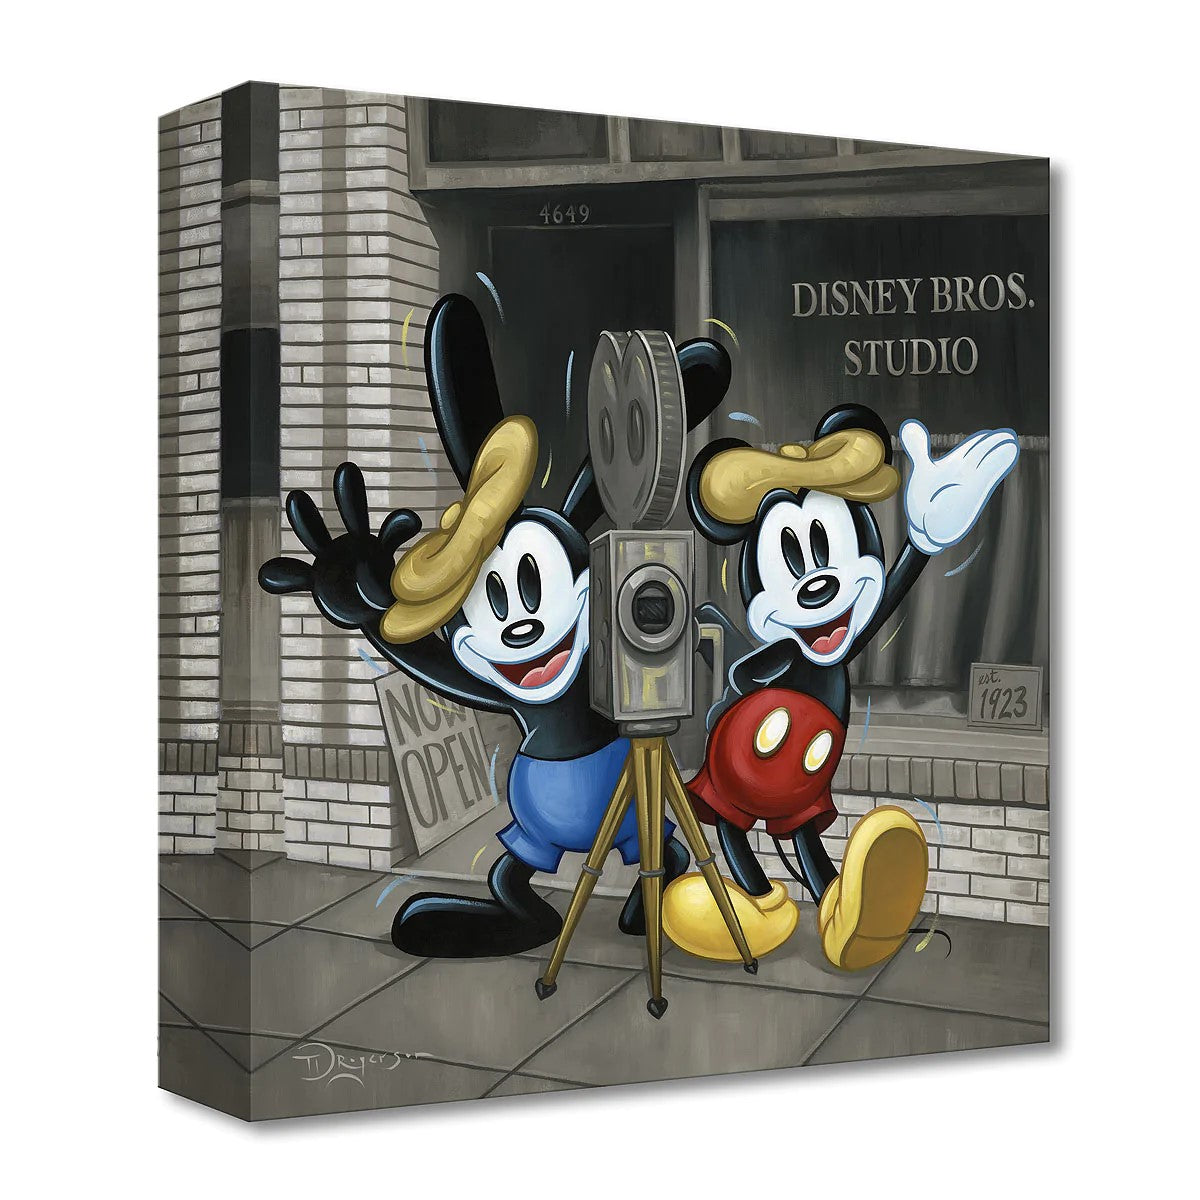 Bros in Business by Tim Rogerson featuring Mickey Mouse and Oswald